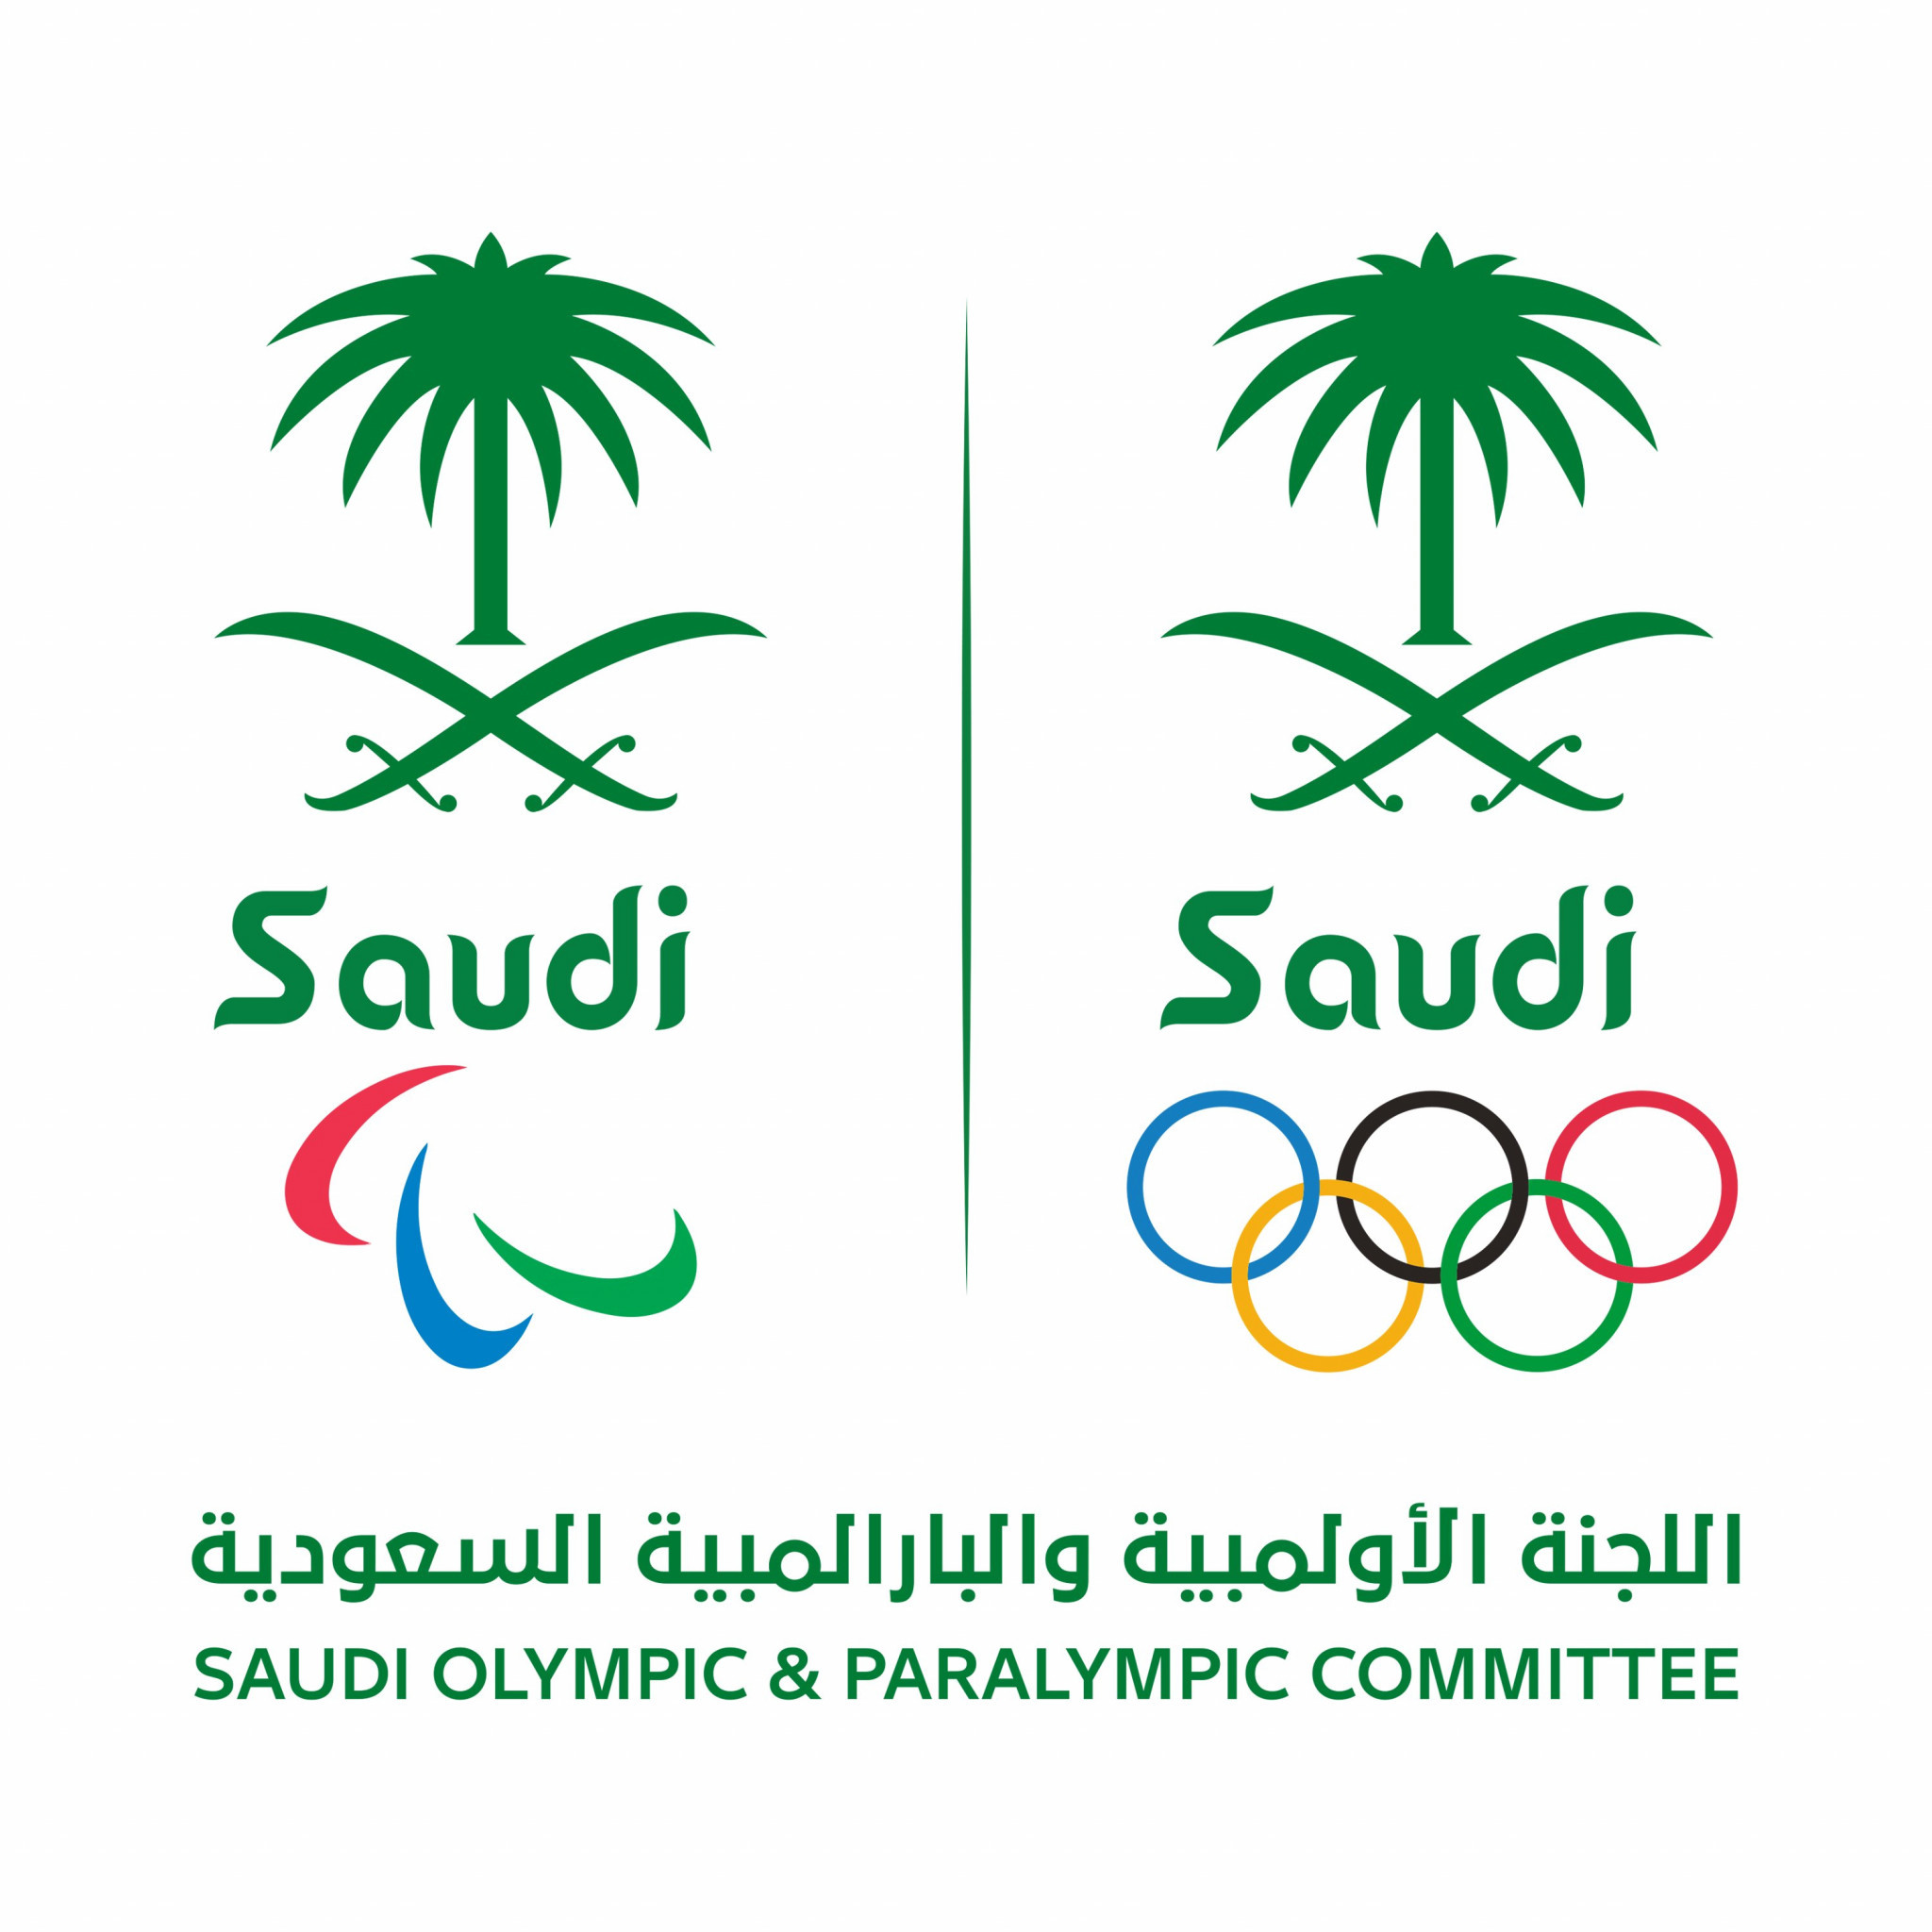 The Saudi Olympic and Paralympic Committee has been formed from a merger between the country's National Olympic and National Paralympic Committees ©SOPC